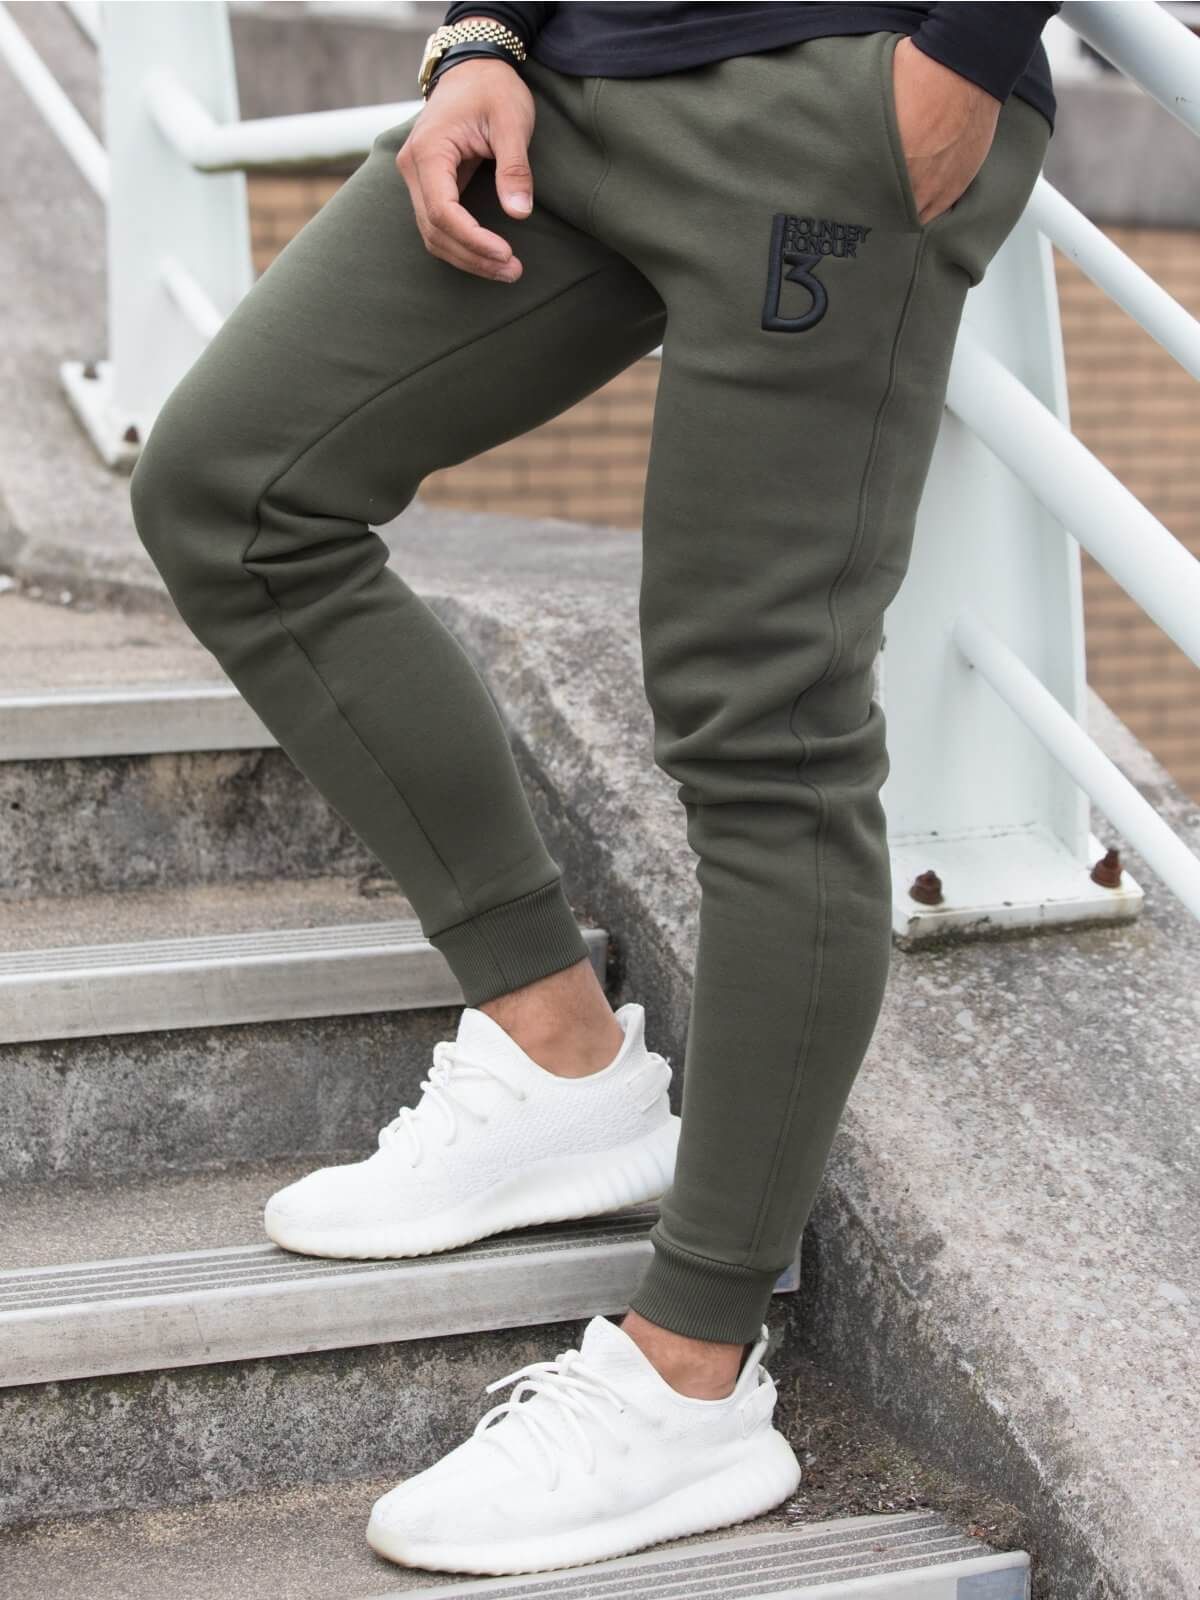  Bound By Honour Radiate Tracksuit Bottoms are ideal for casual everyday wear or in the gym. Crafted from cotton and polyester. The tracksuit bottom has been detailed with a signature design and a BBH embroidery on leg. Matching tracksuit Hoodie available.